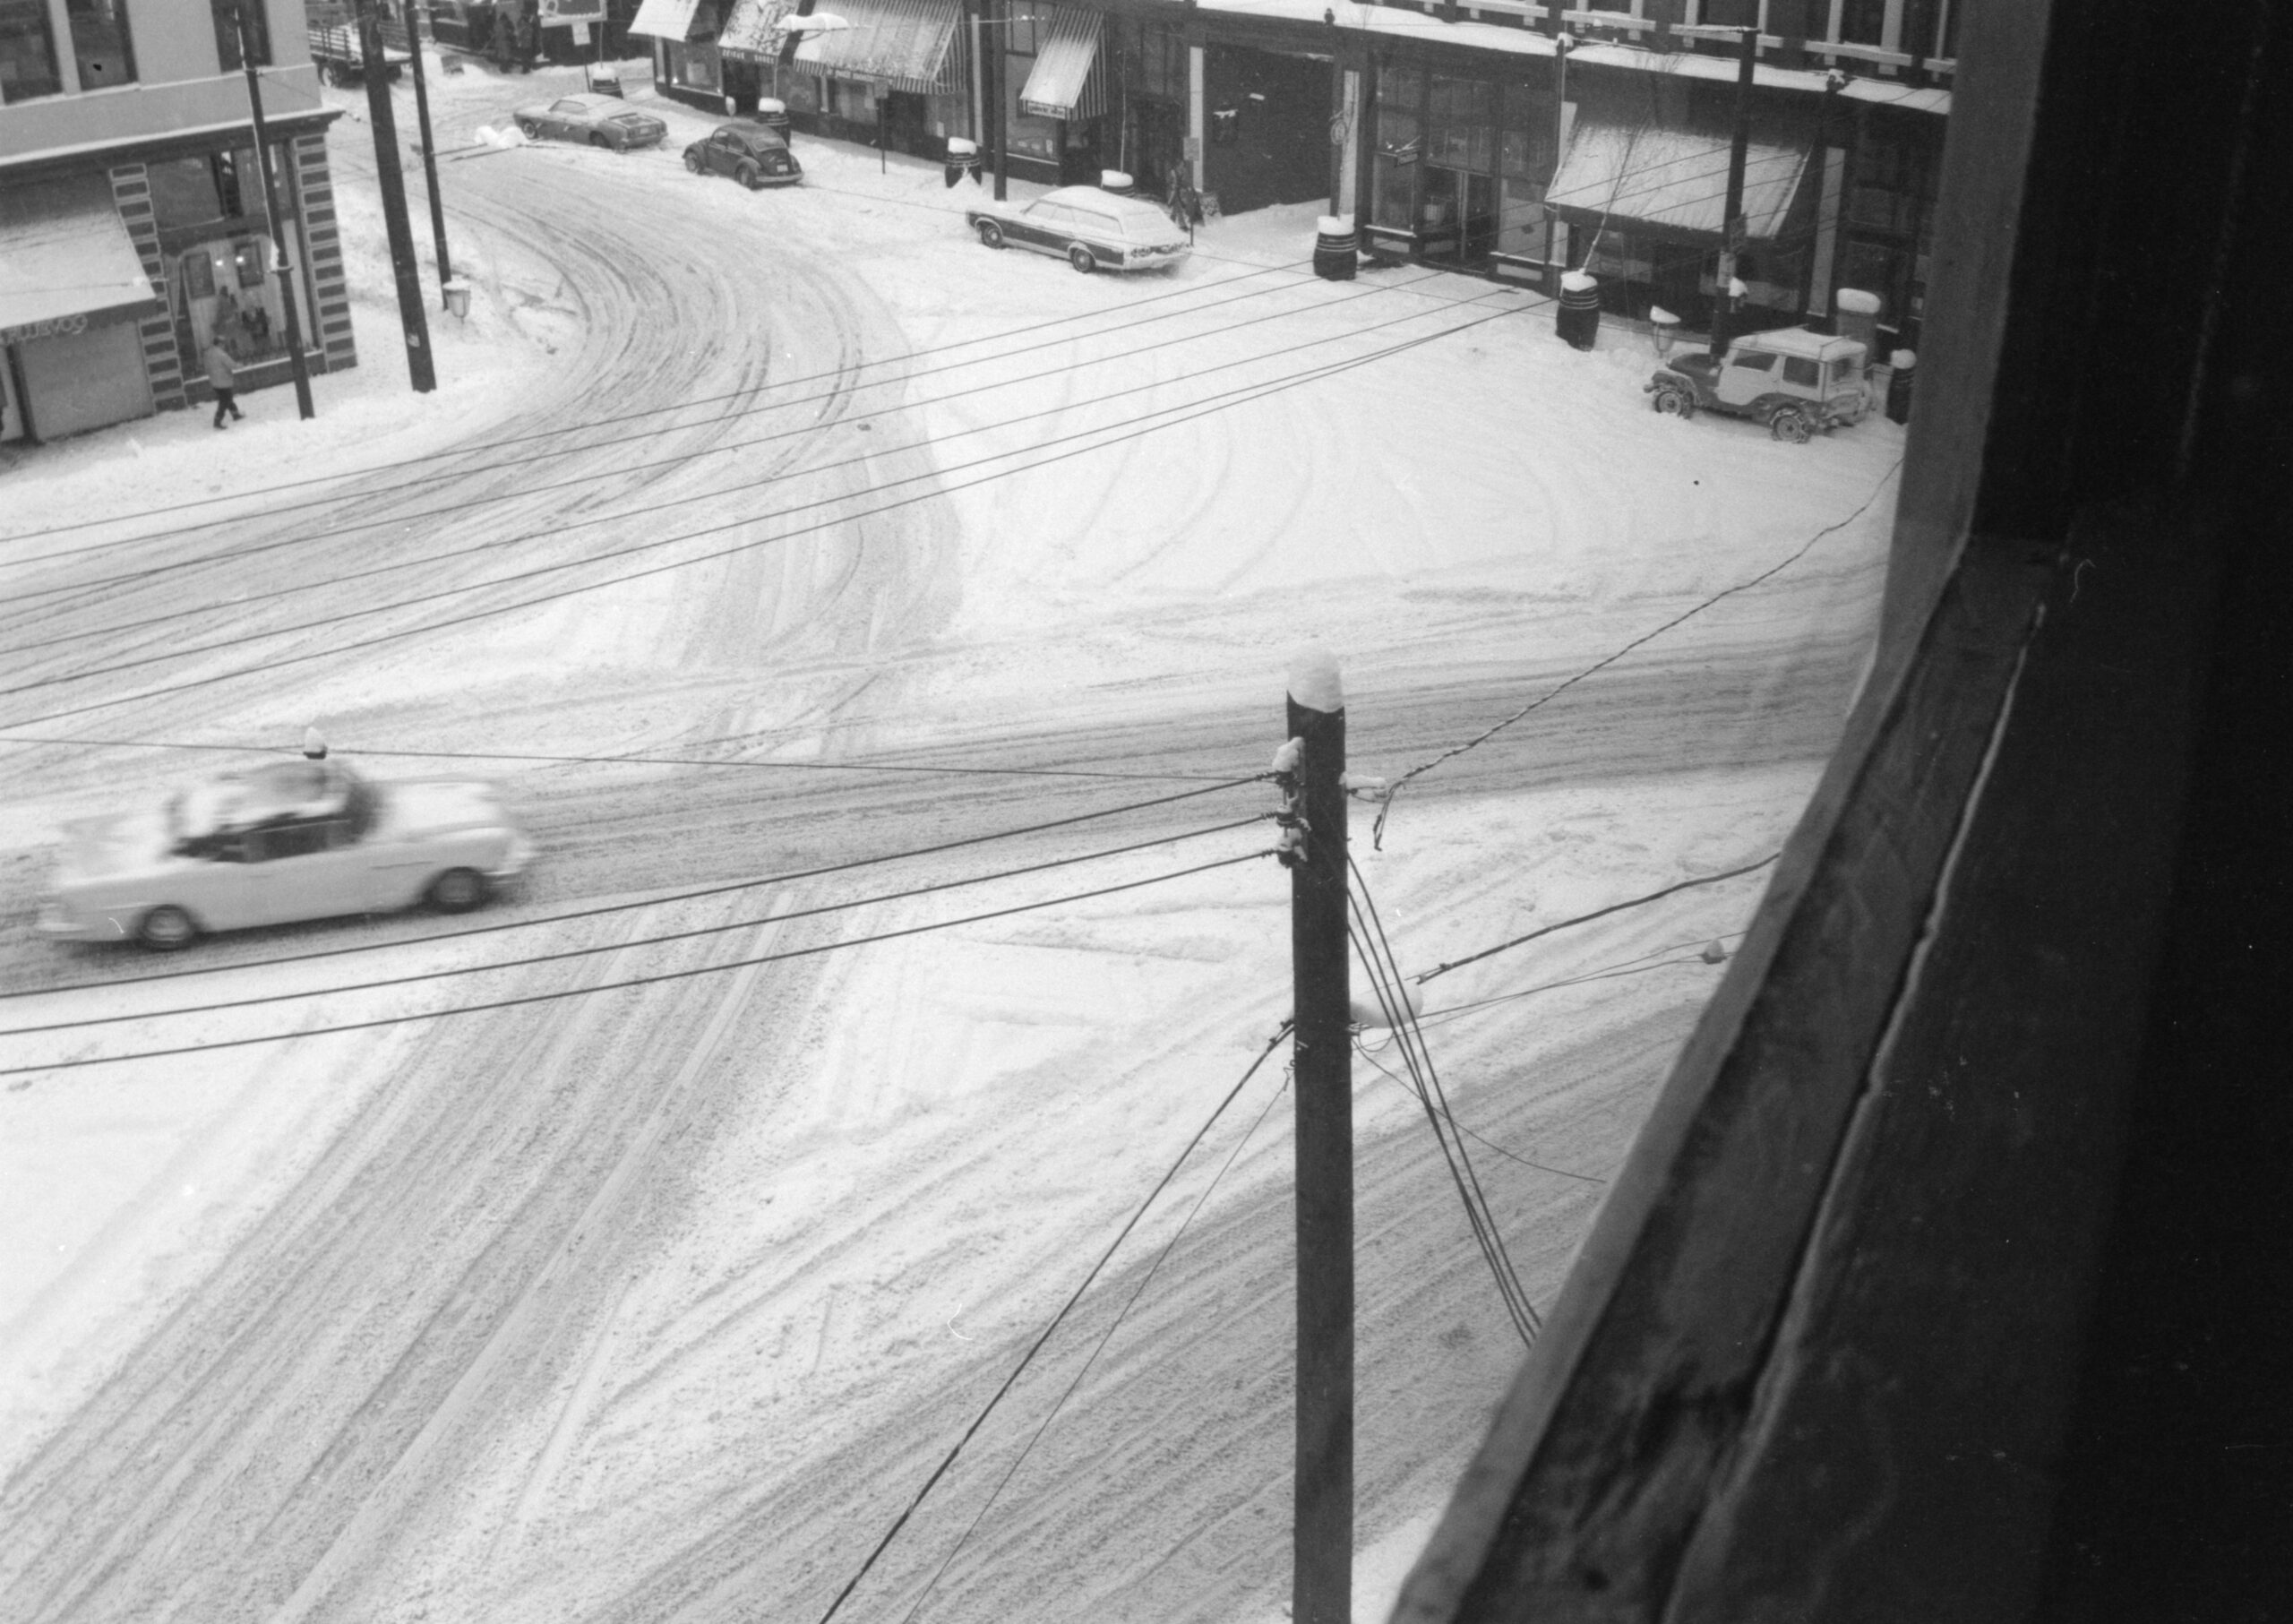 Snow on Gastown streets, 1 of 16. Reference code: COV-S644-: CVA 1095-09235